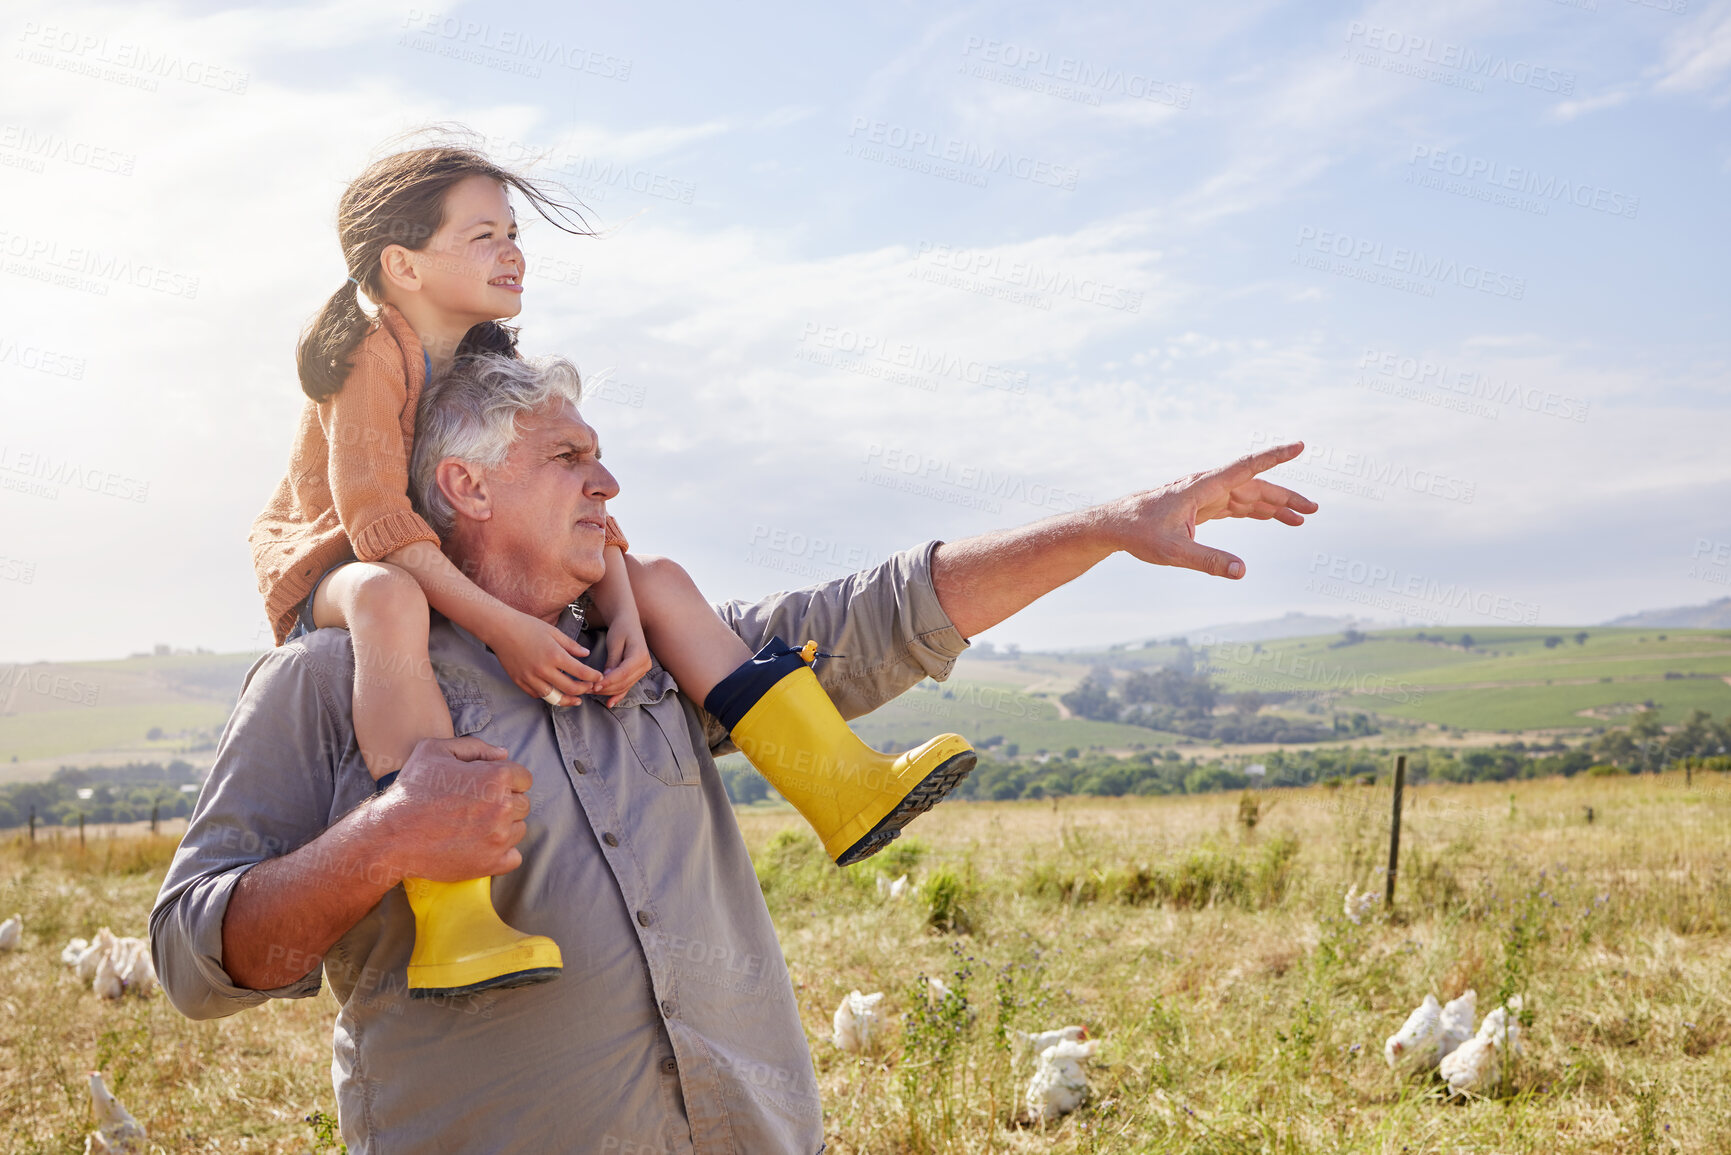 Buy stock photo Shot of a mature man bonding with his granddaughter on a poultry farm